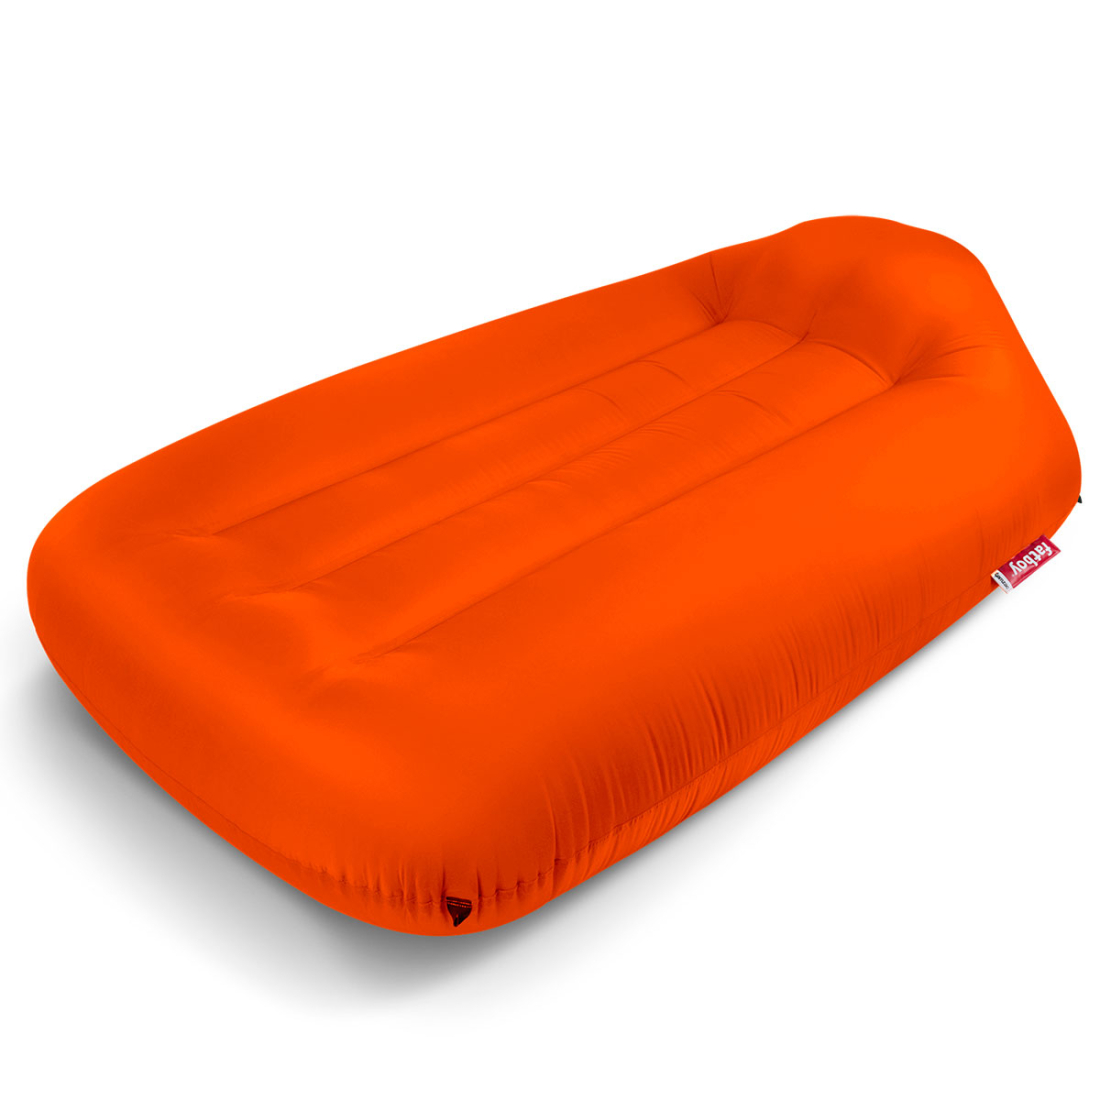 Quality design by Fatboy. Iconic beanbags and Lamzac